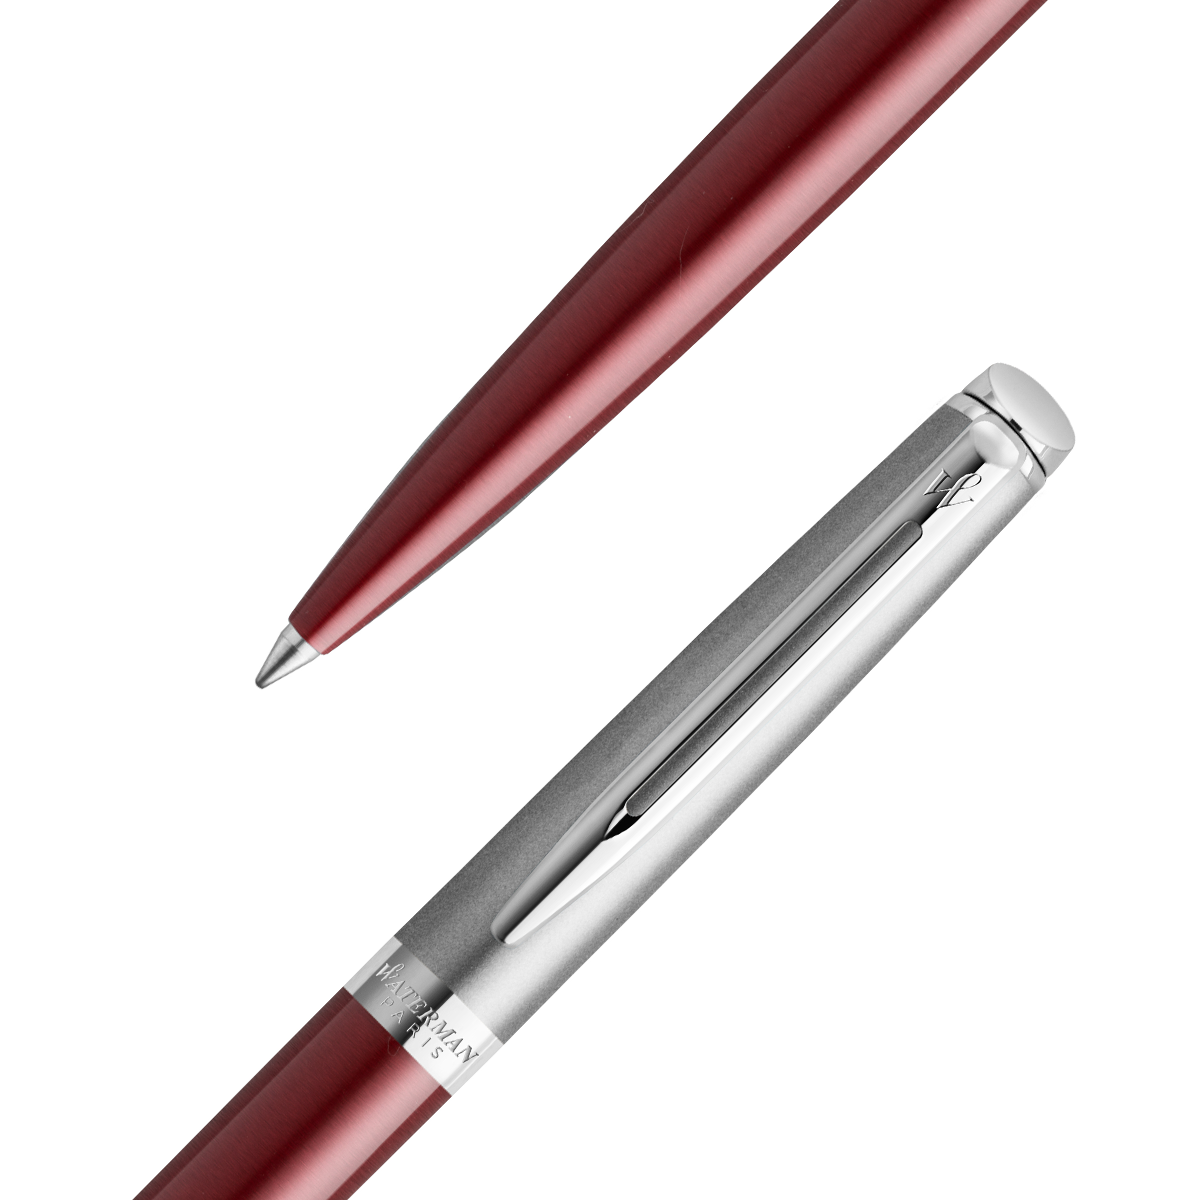 Hémisphère Essential Red/Chrome Ballpoint Pen in the group Pens / Fine Writing / Ballpoint Pens at Pen Store (128032)